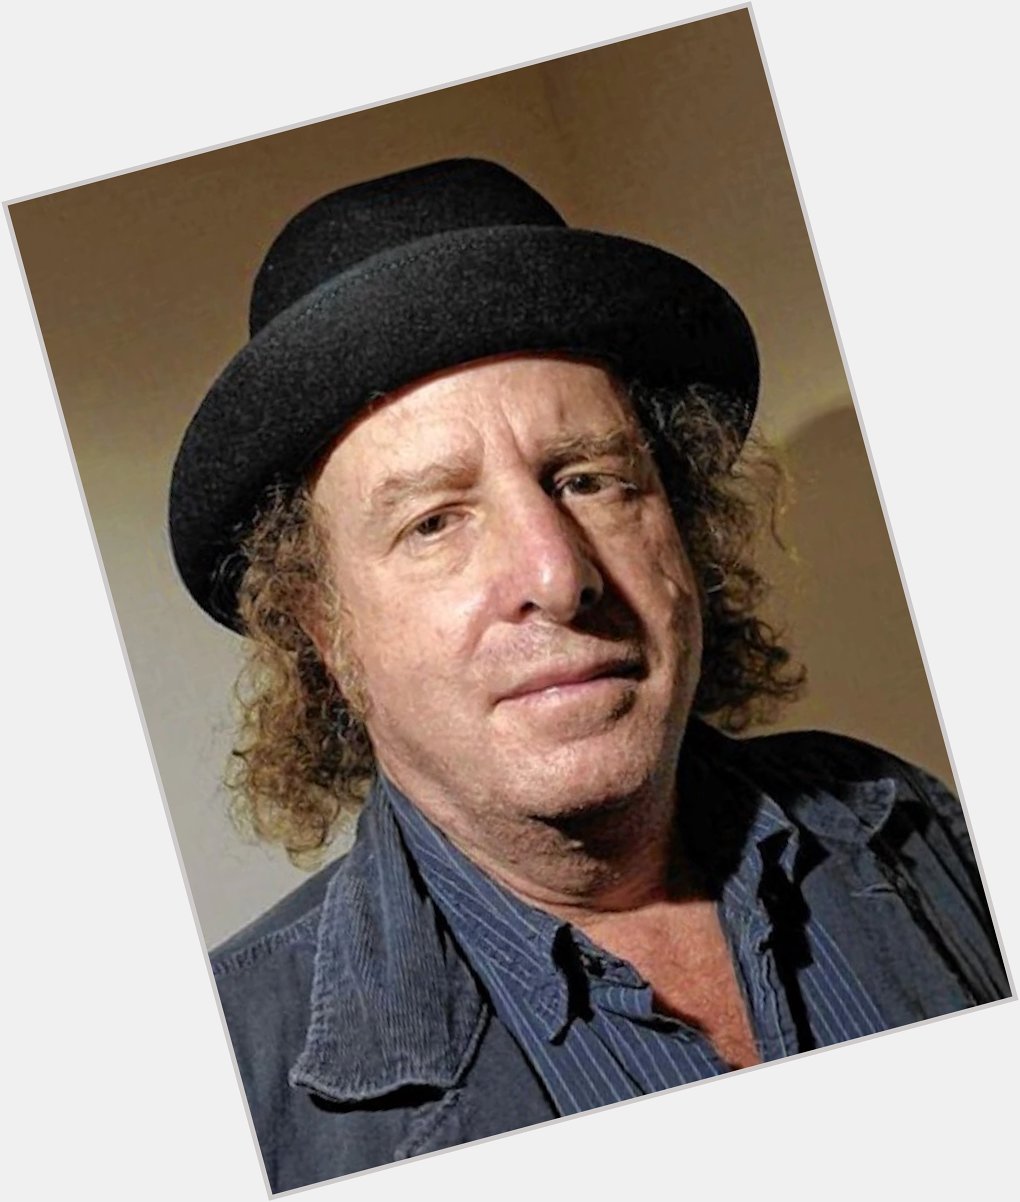 Happy Birthday to one of the all timers, comedian Steven Wright.
67 years old today.
Cheers. 